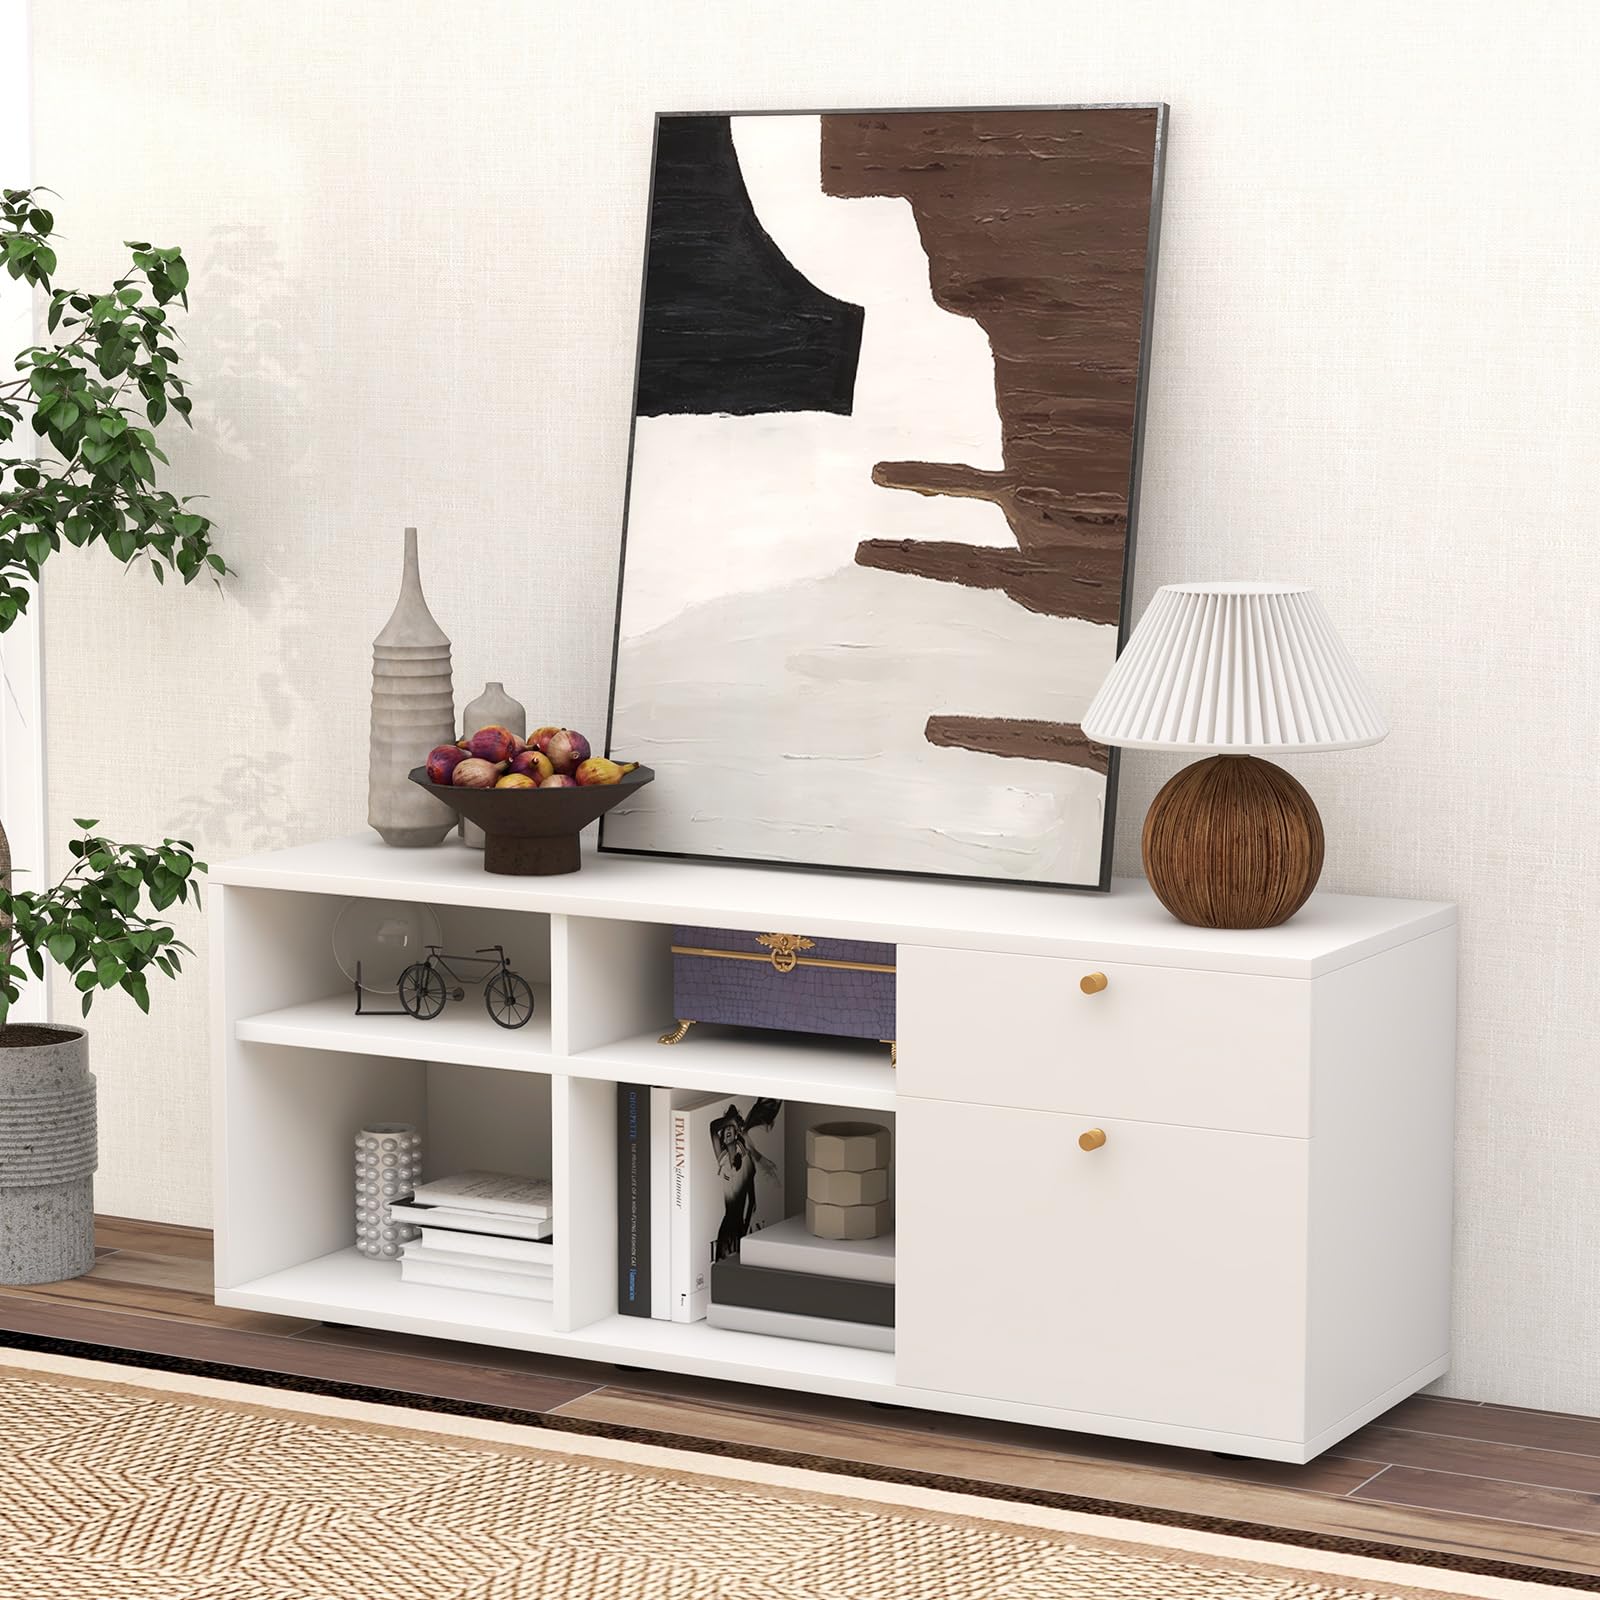 Giantex TV-Stand for Bedroom Entertainment Center - Modern TV Console Cabinet with 2 Drawers, 4 Compartments